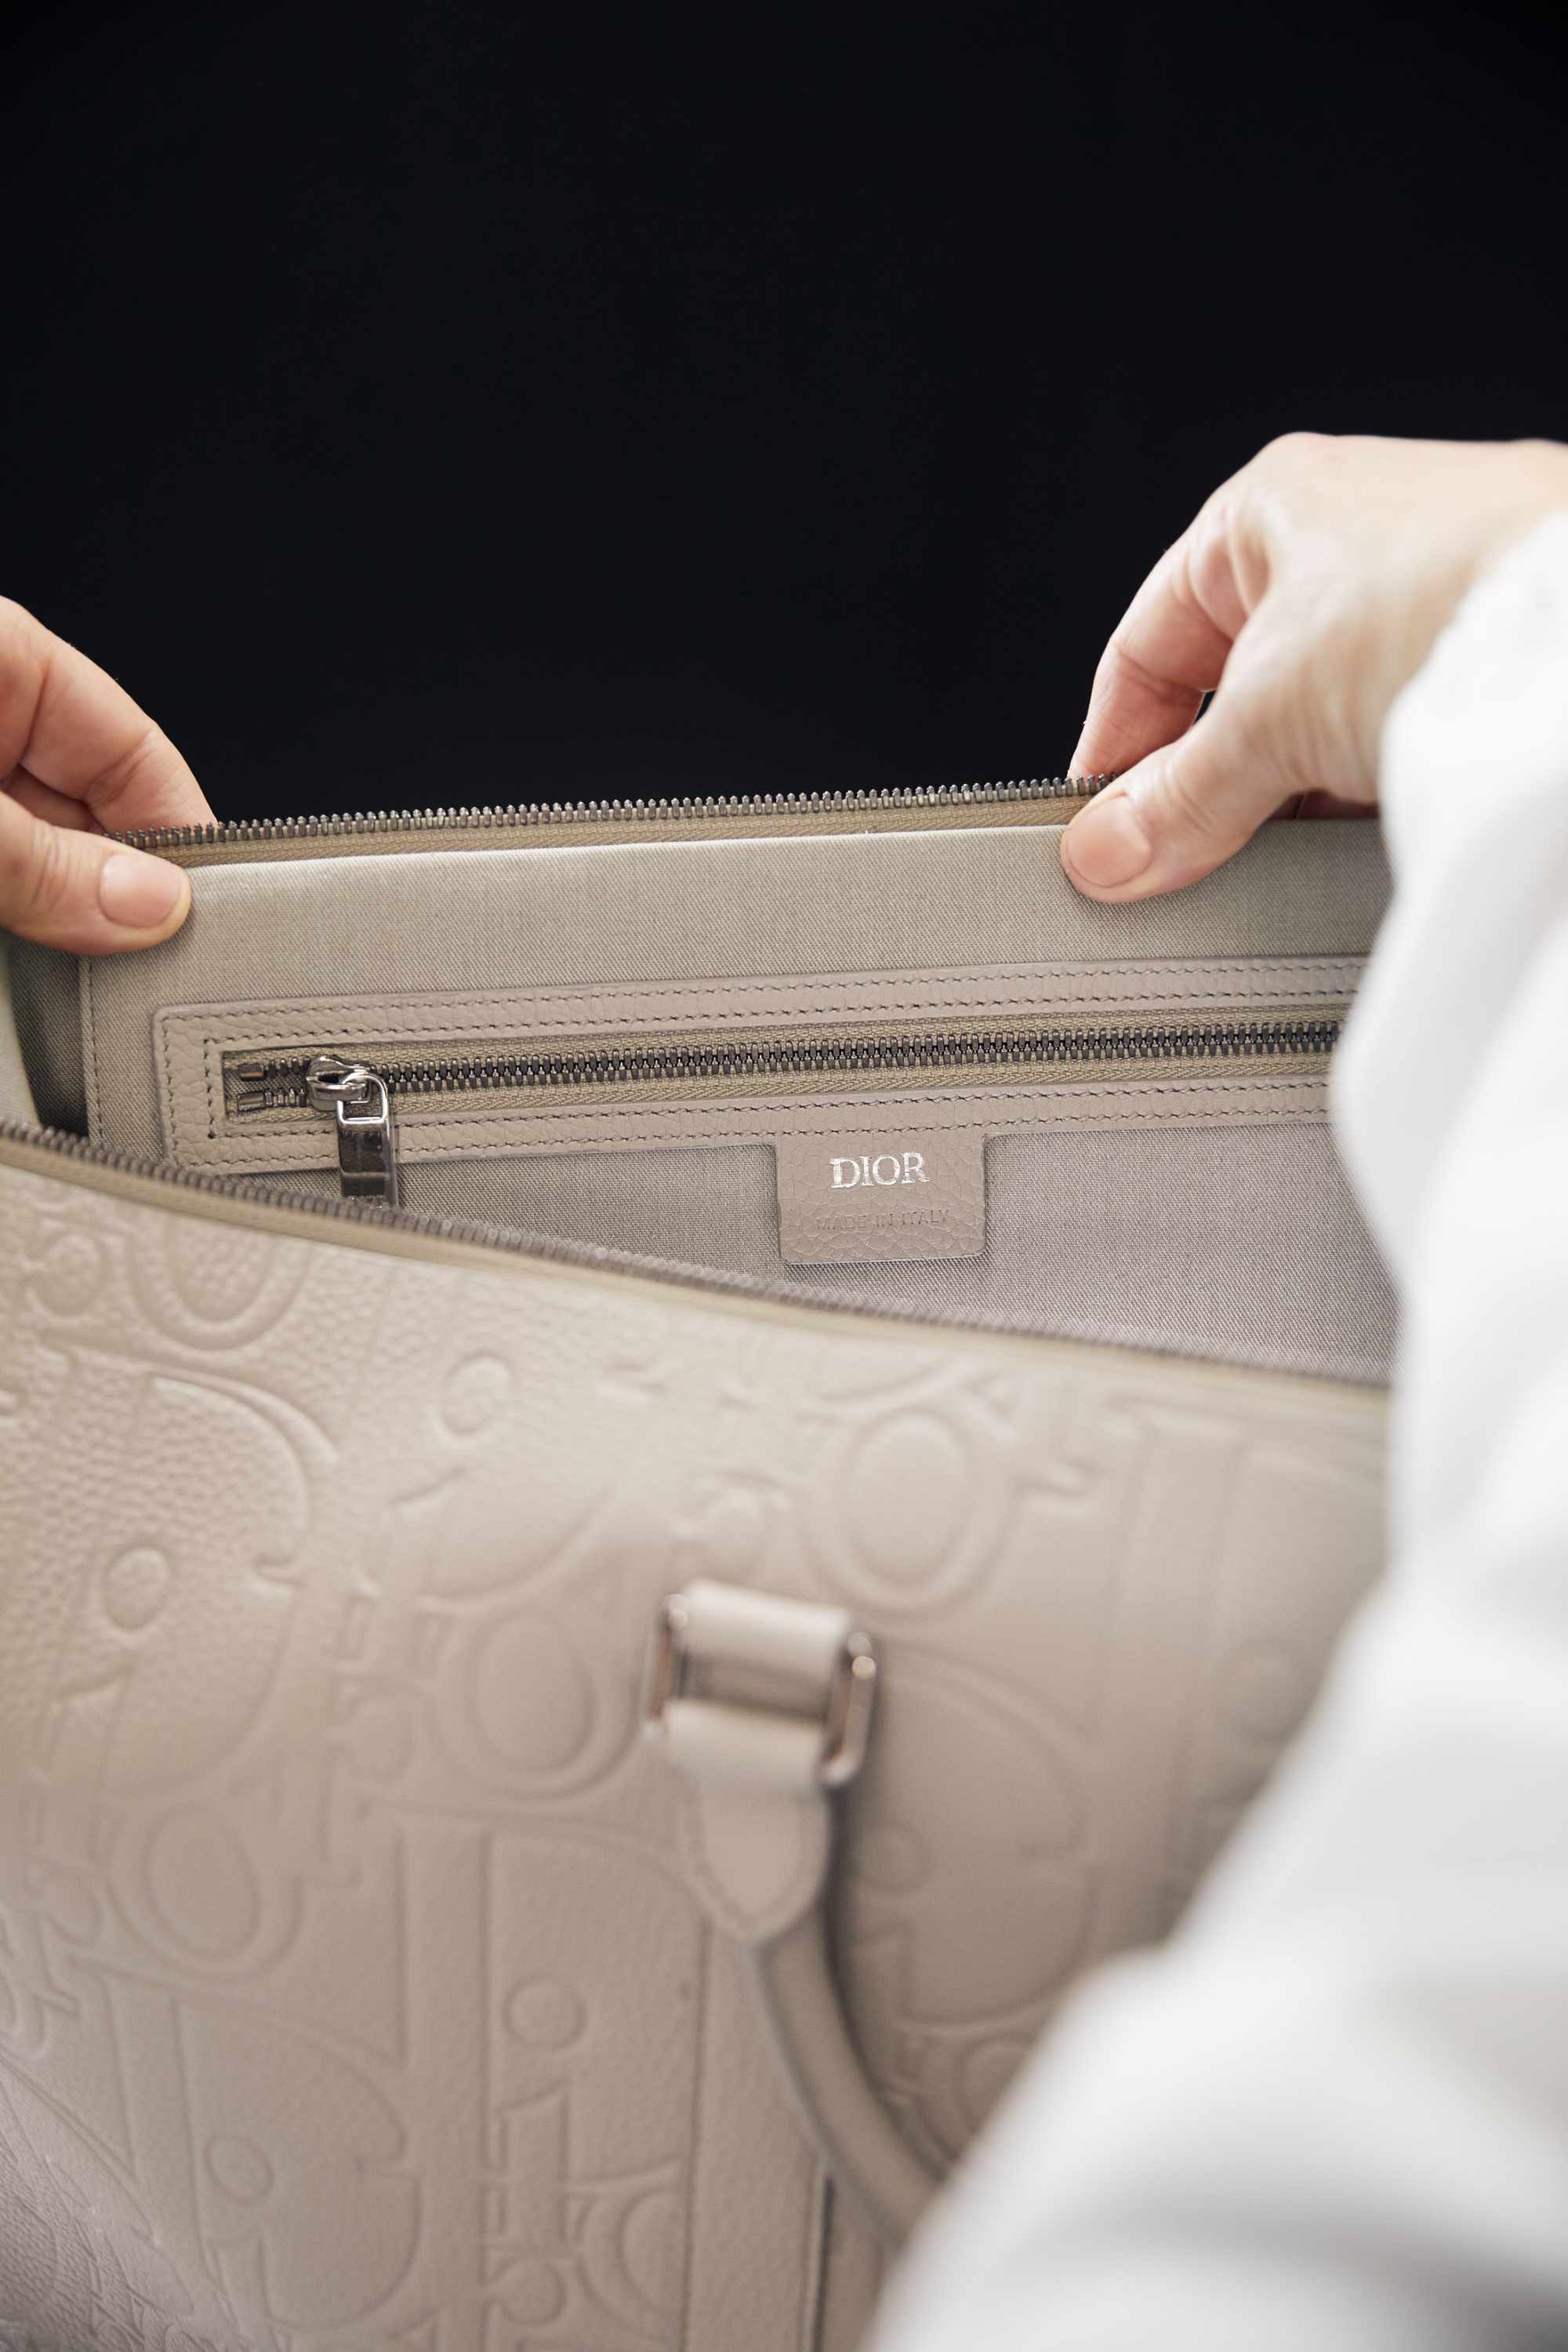 How Dior Sculpted Leather Bags With Gravity